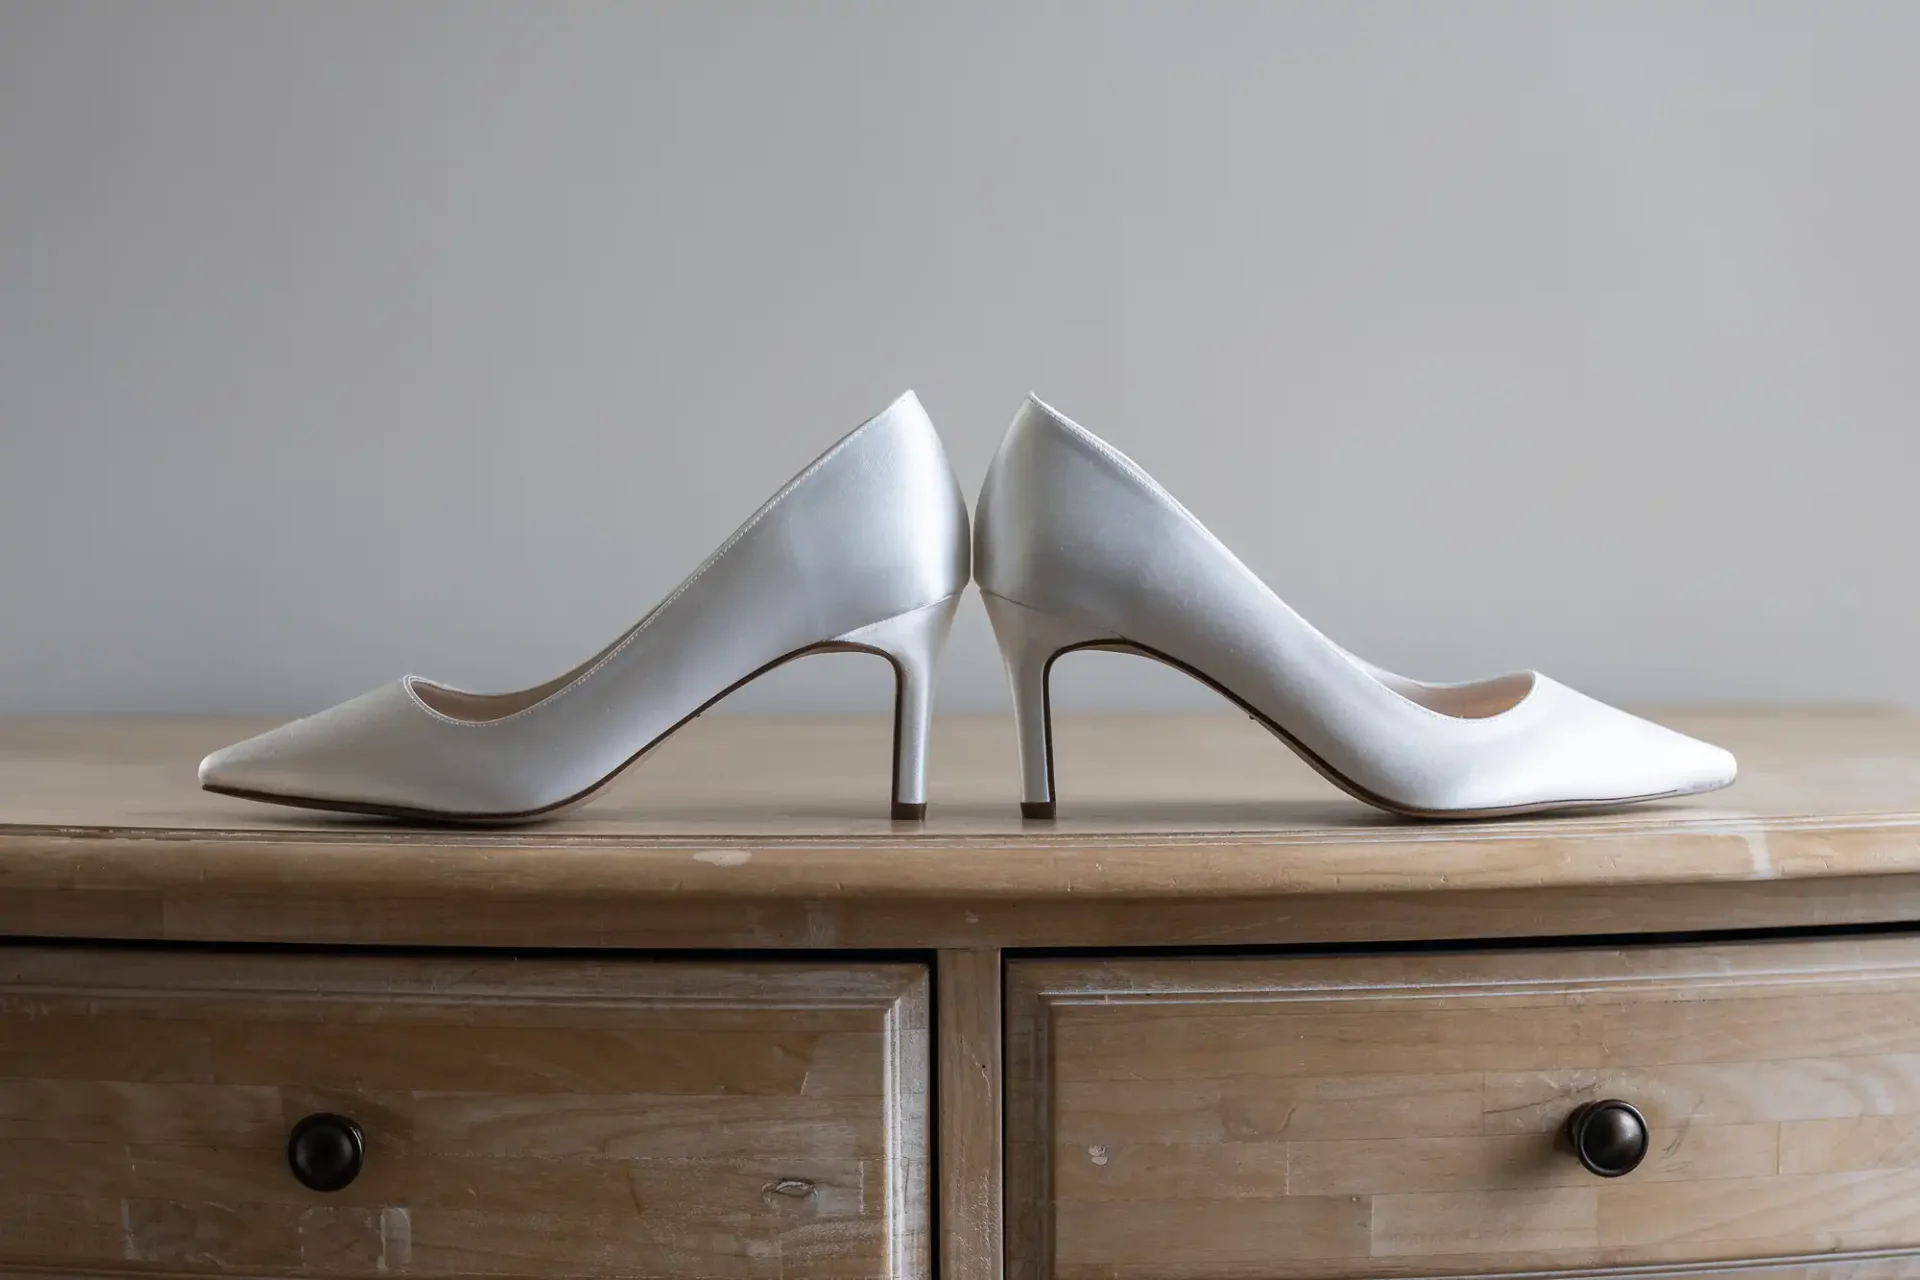 A pair of elegant white high-heeled shoes positioned back-to-back on a wooden dresser against a neutral background.